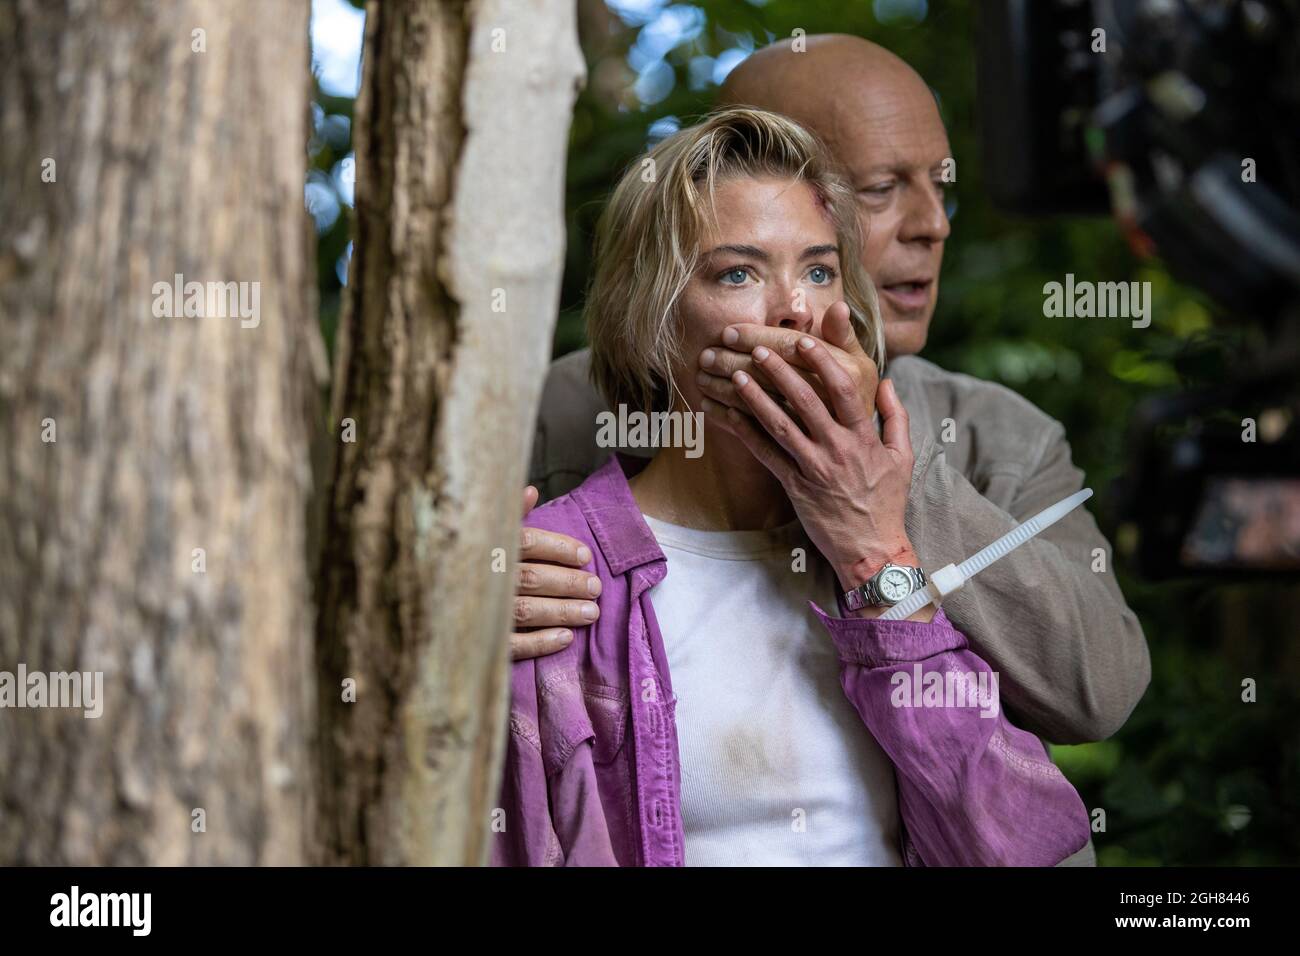 BRUCE WILLIS and JAIME KING in OUT OF DEATH (2021), directed by MIKE BURNS. Credit: EFO FILMS / Album Stock Photo